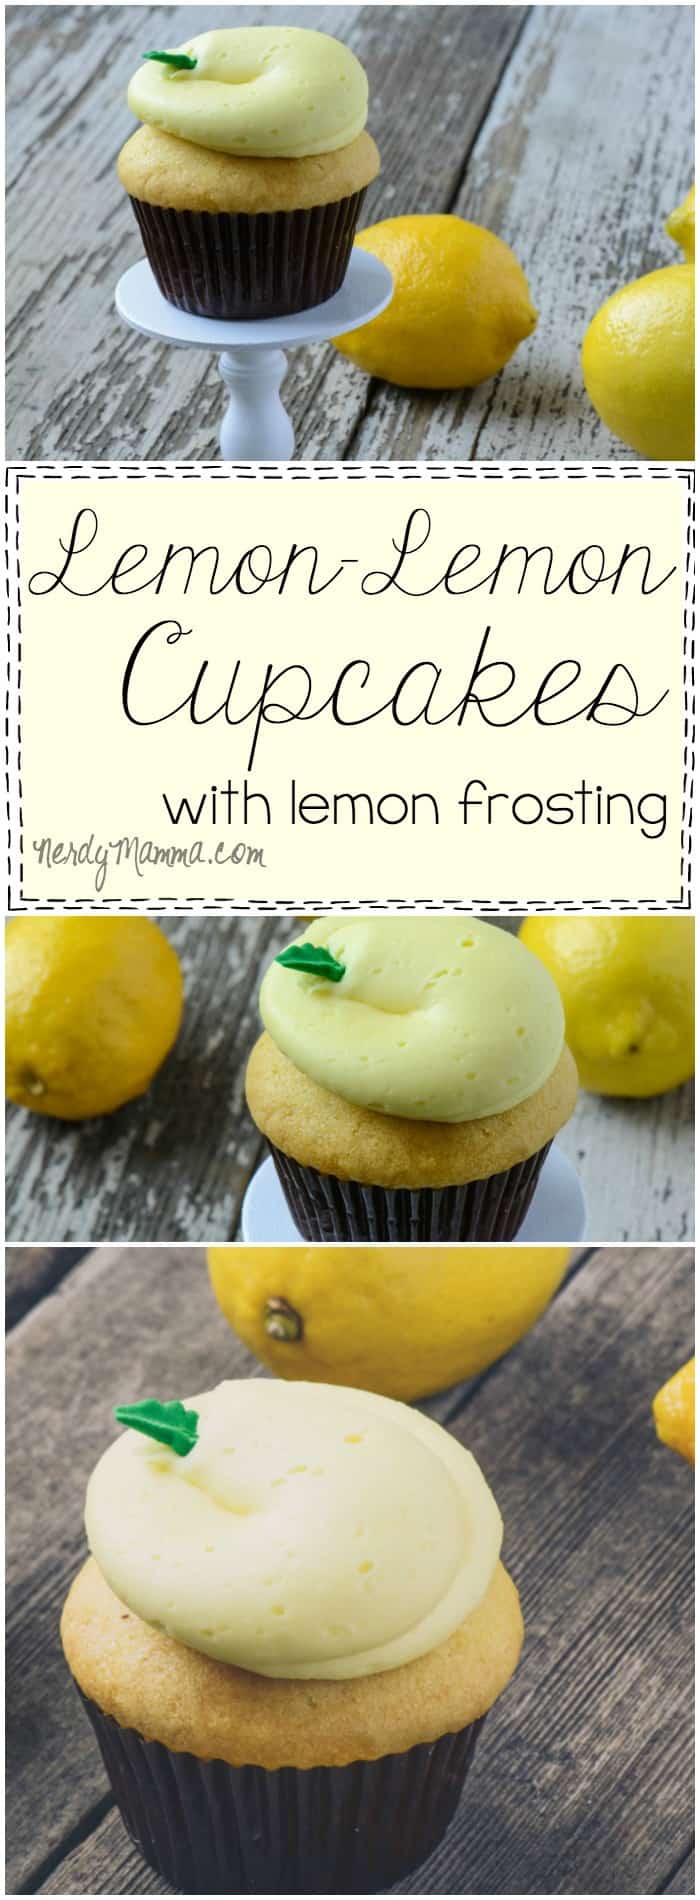 What a PERFECT summer cupcake recipe! I love lemon and these Double Lemon Cupcakes sound wonderful.